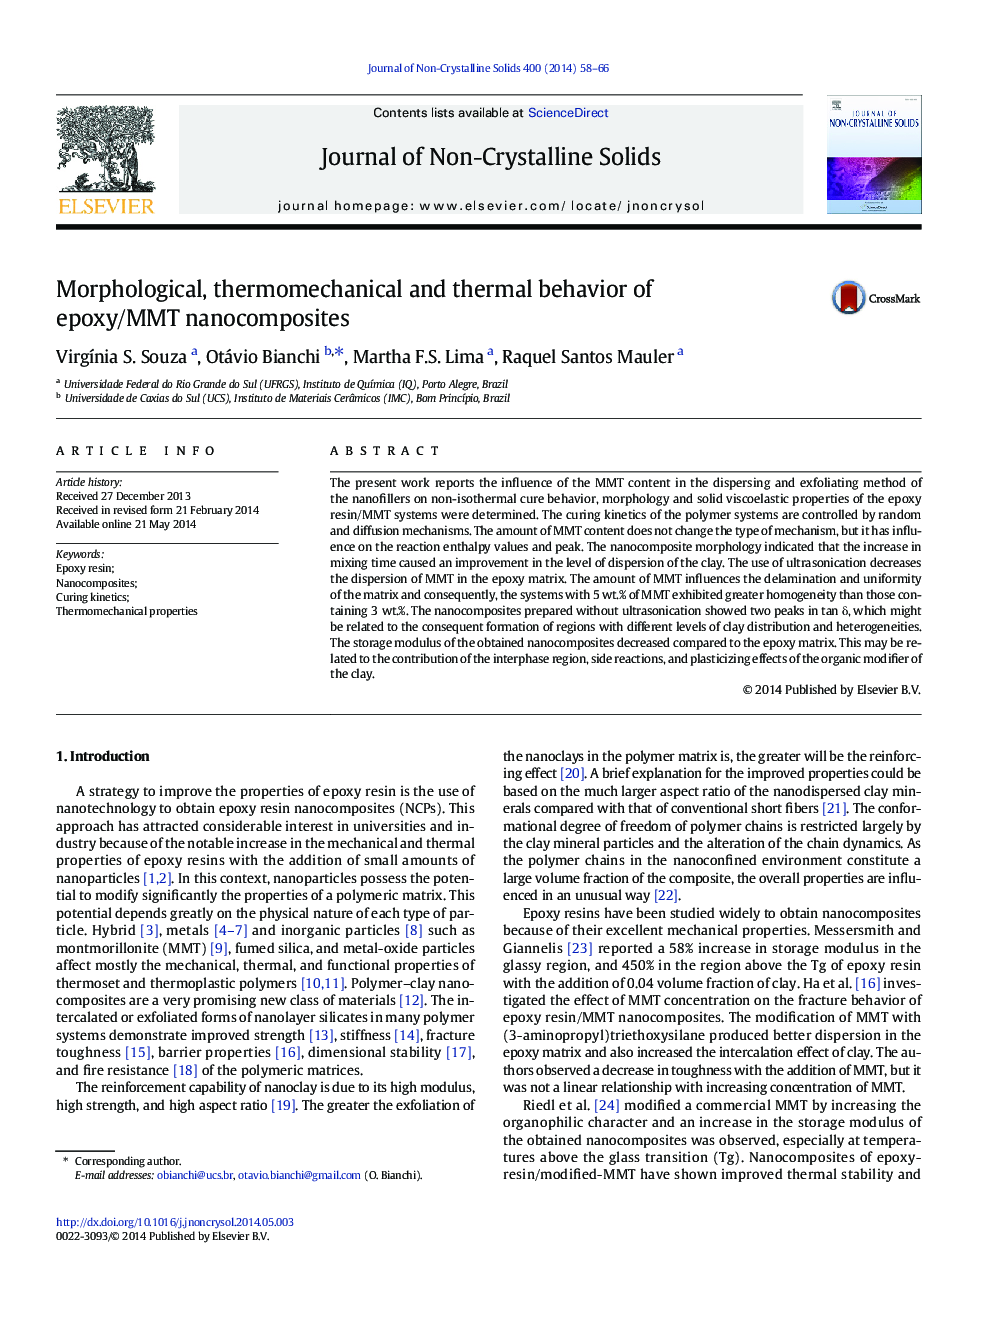 Morphological, thermomechanical and thermal behavior of epoxy/MMT nanocomposites